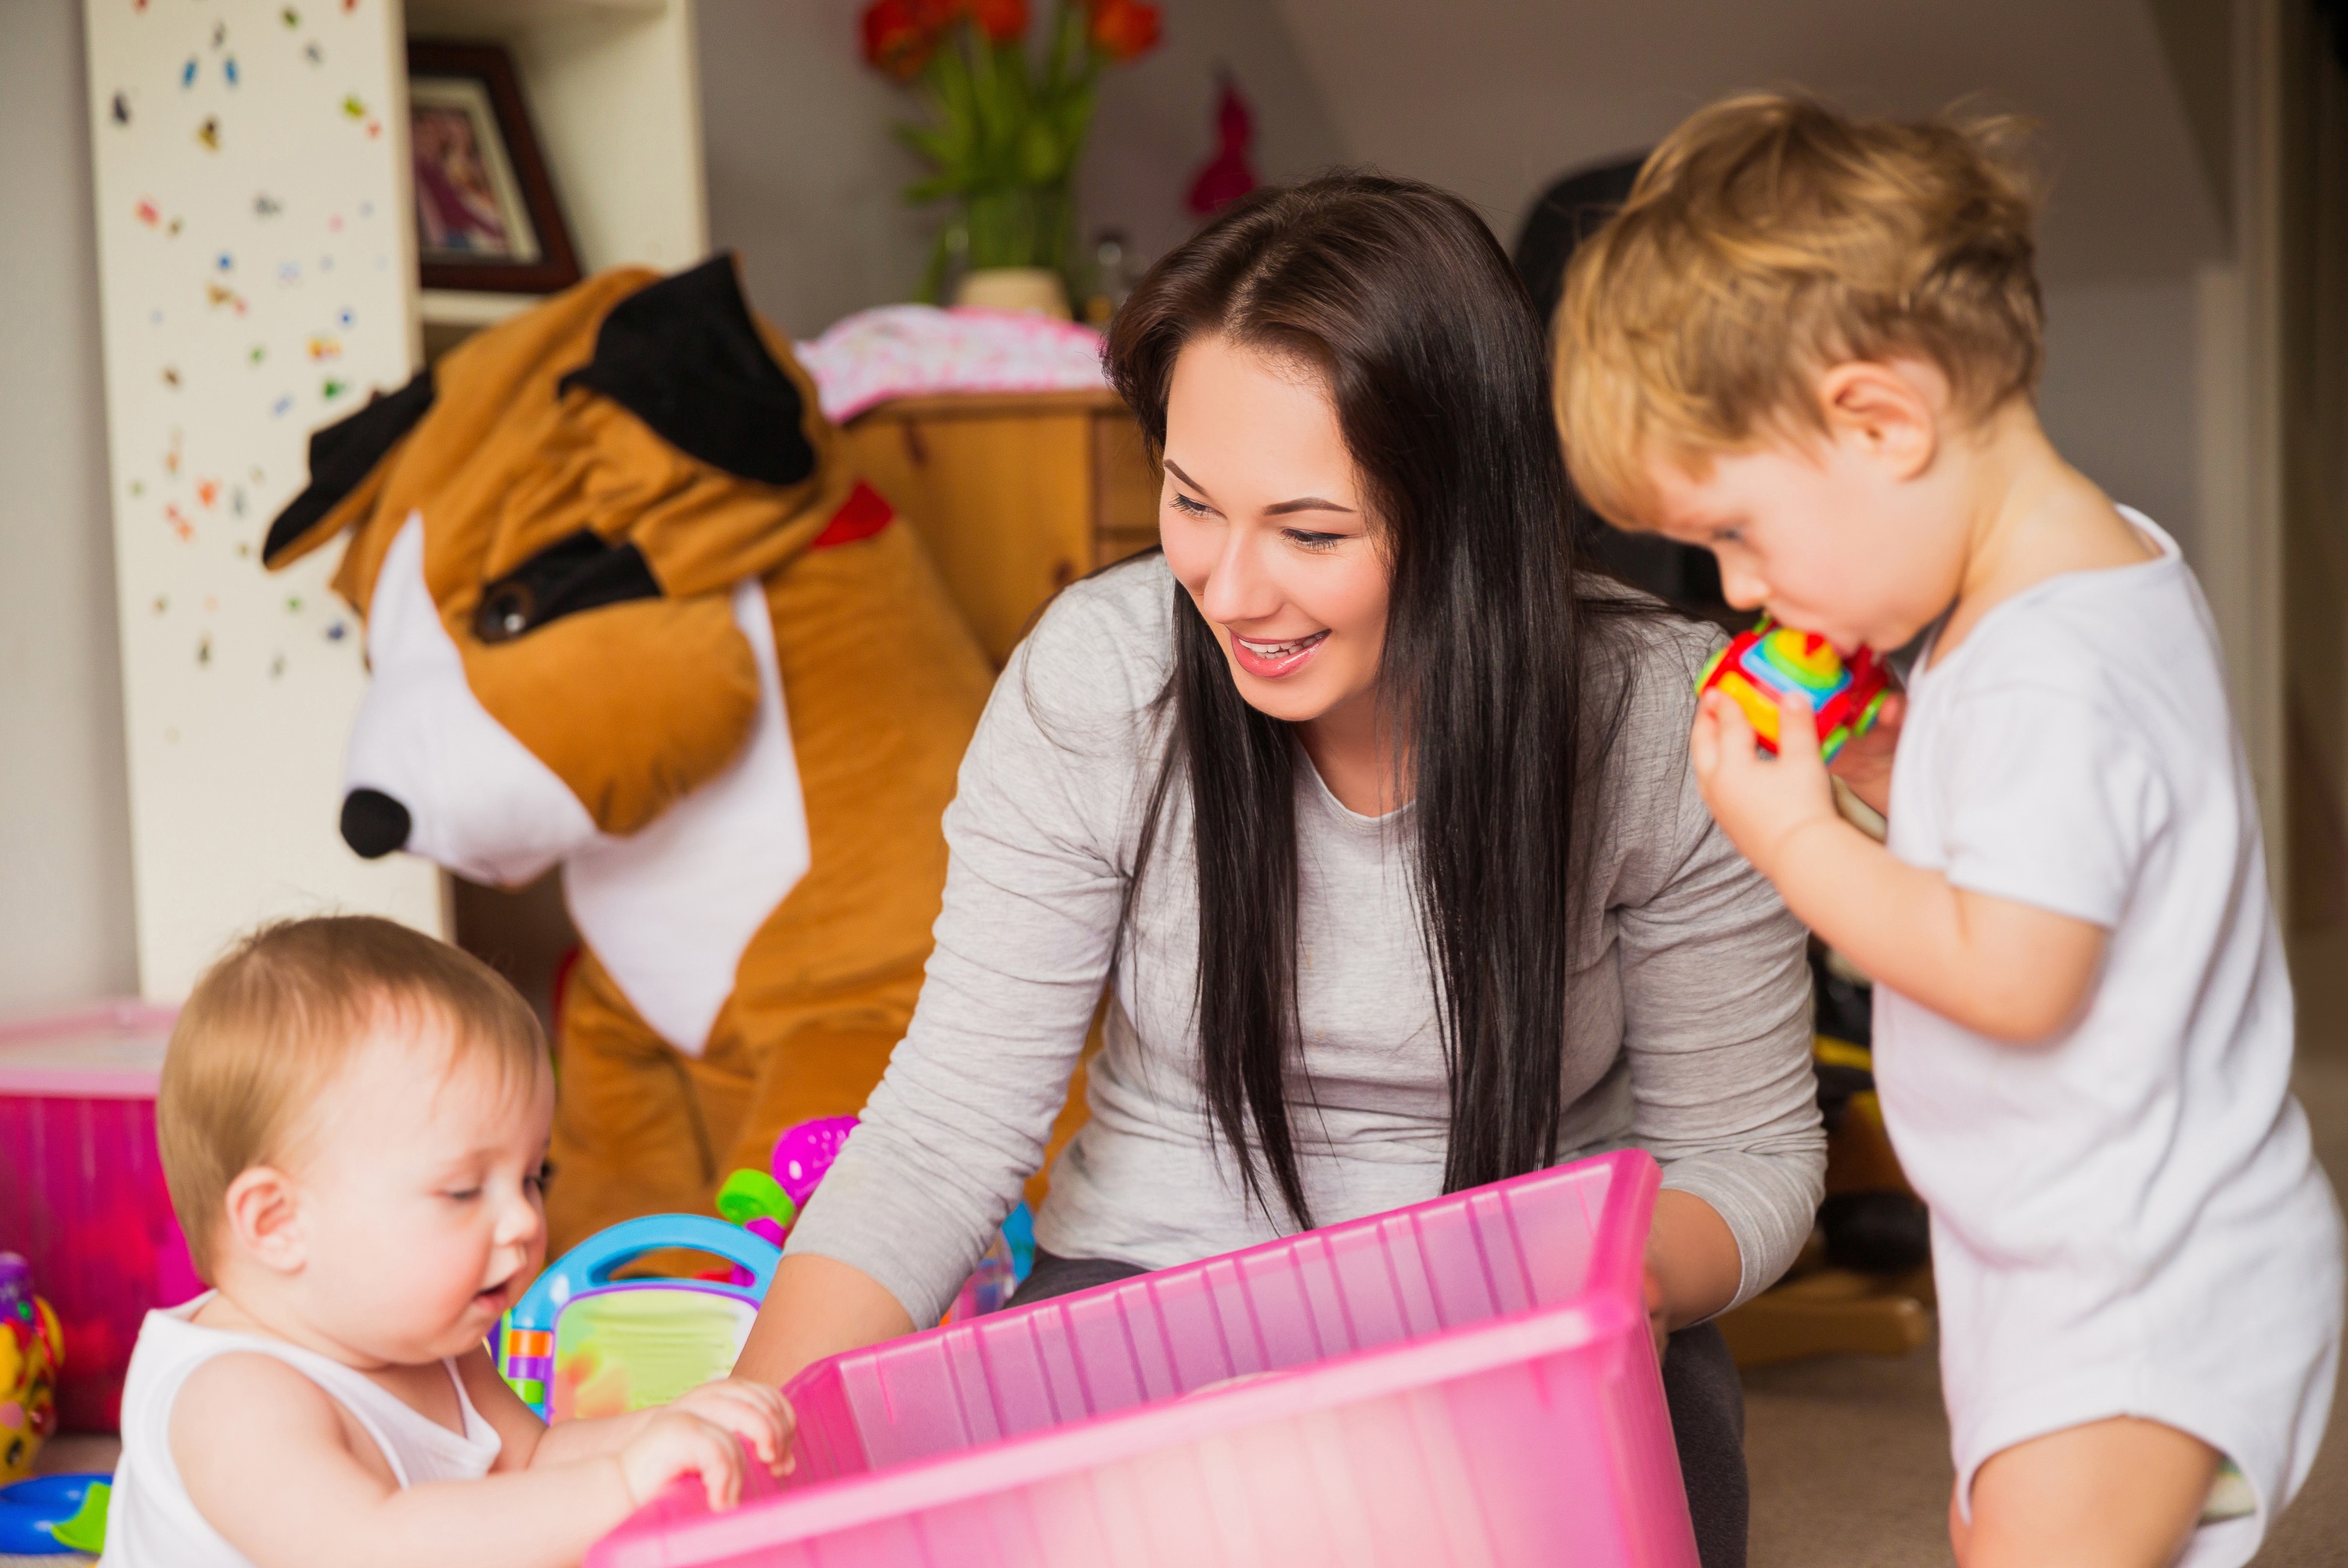 How to Find a Good Babysitter in the Area to Care for Your